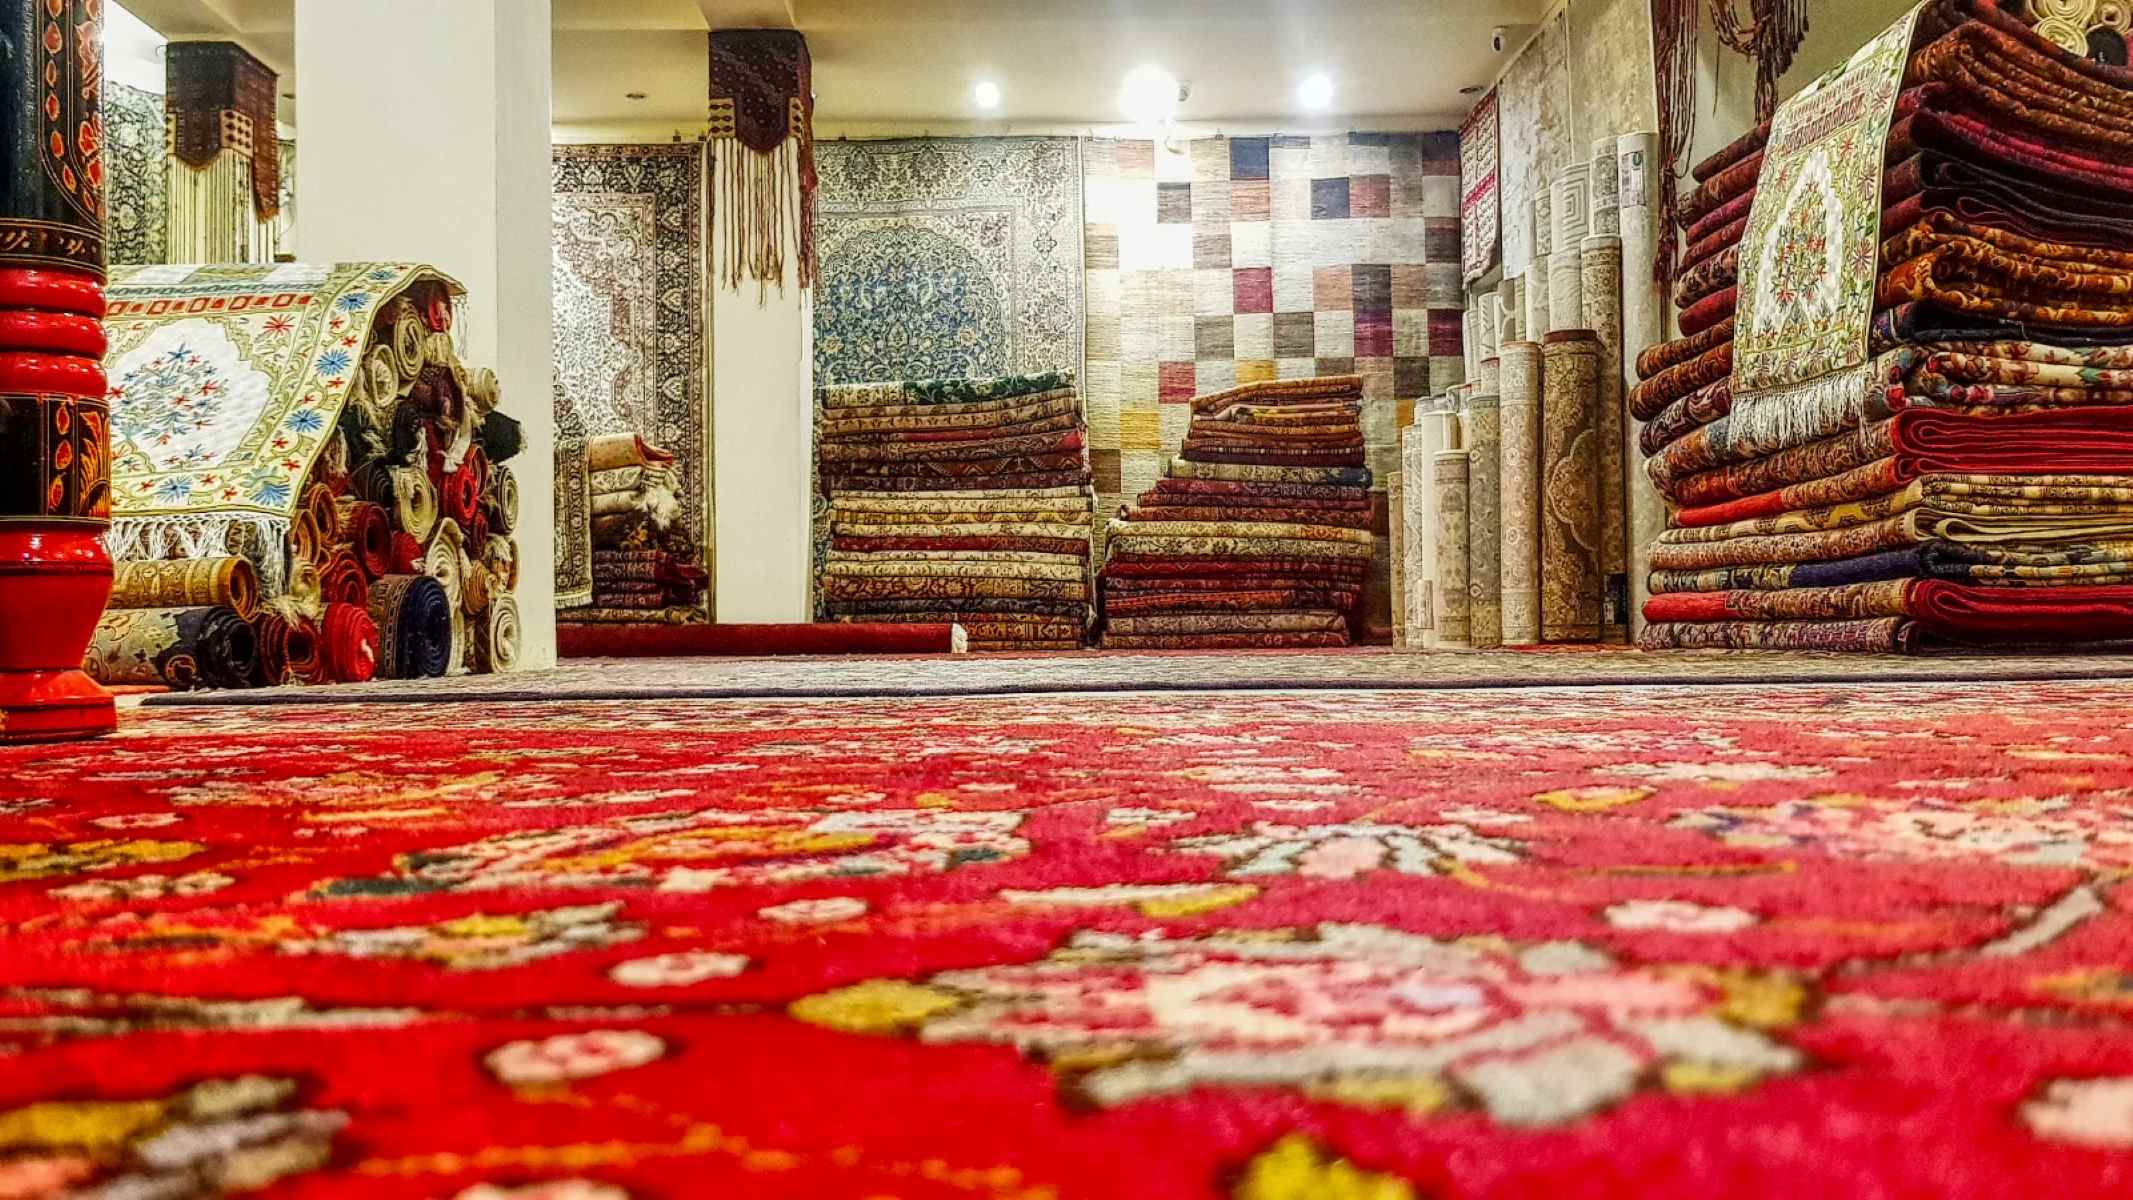 Discover The Most Unique Rugs And Carpets You've Ever Seen!